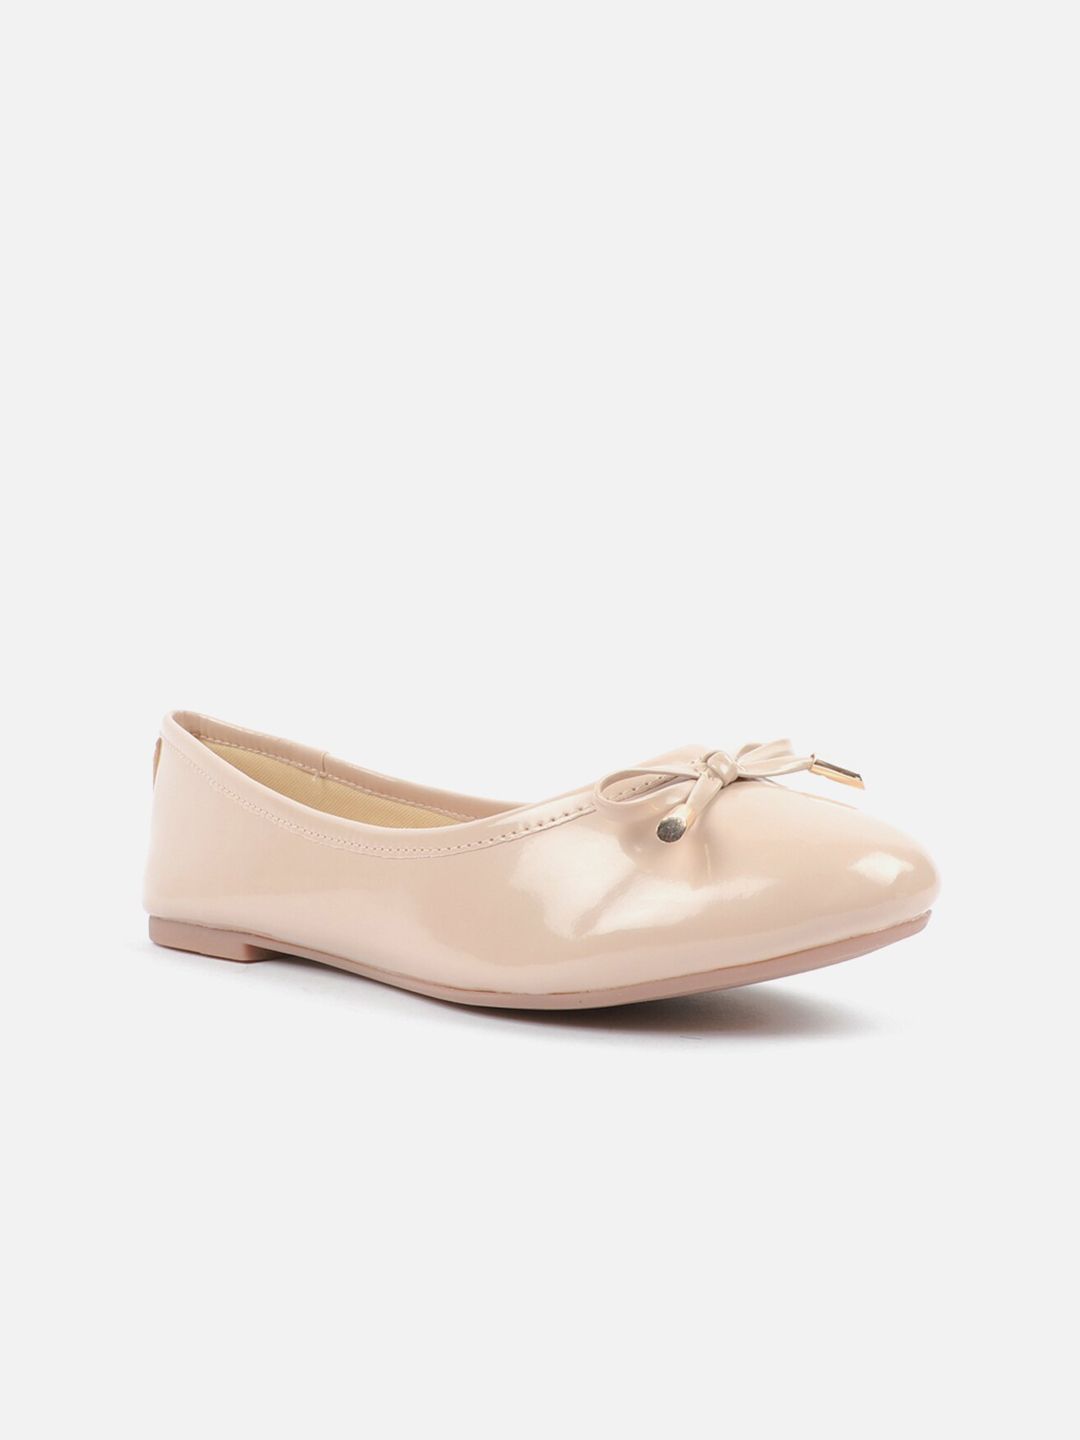 Carlton London Women Pink Solid Synthetic Ballerinas Flats with Bows Price in India